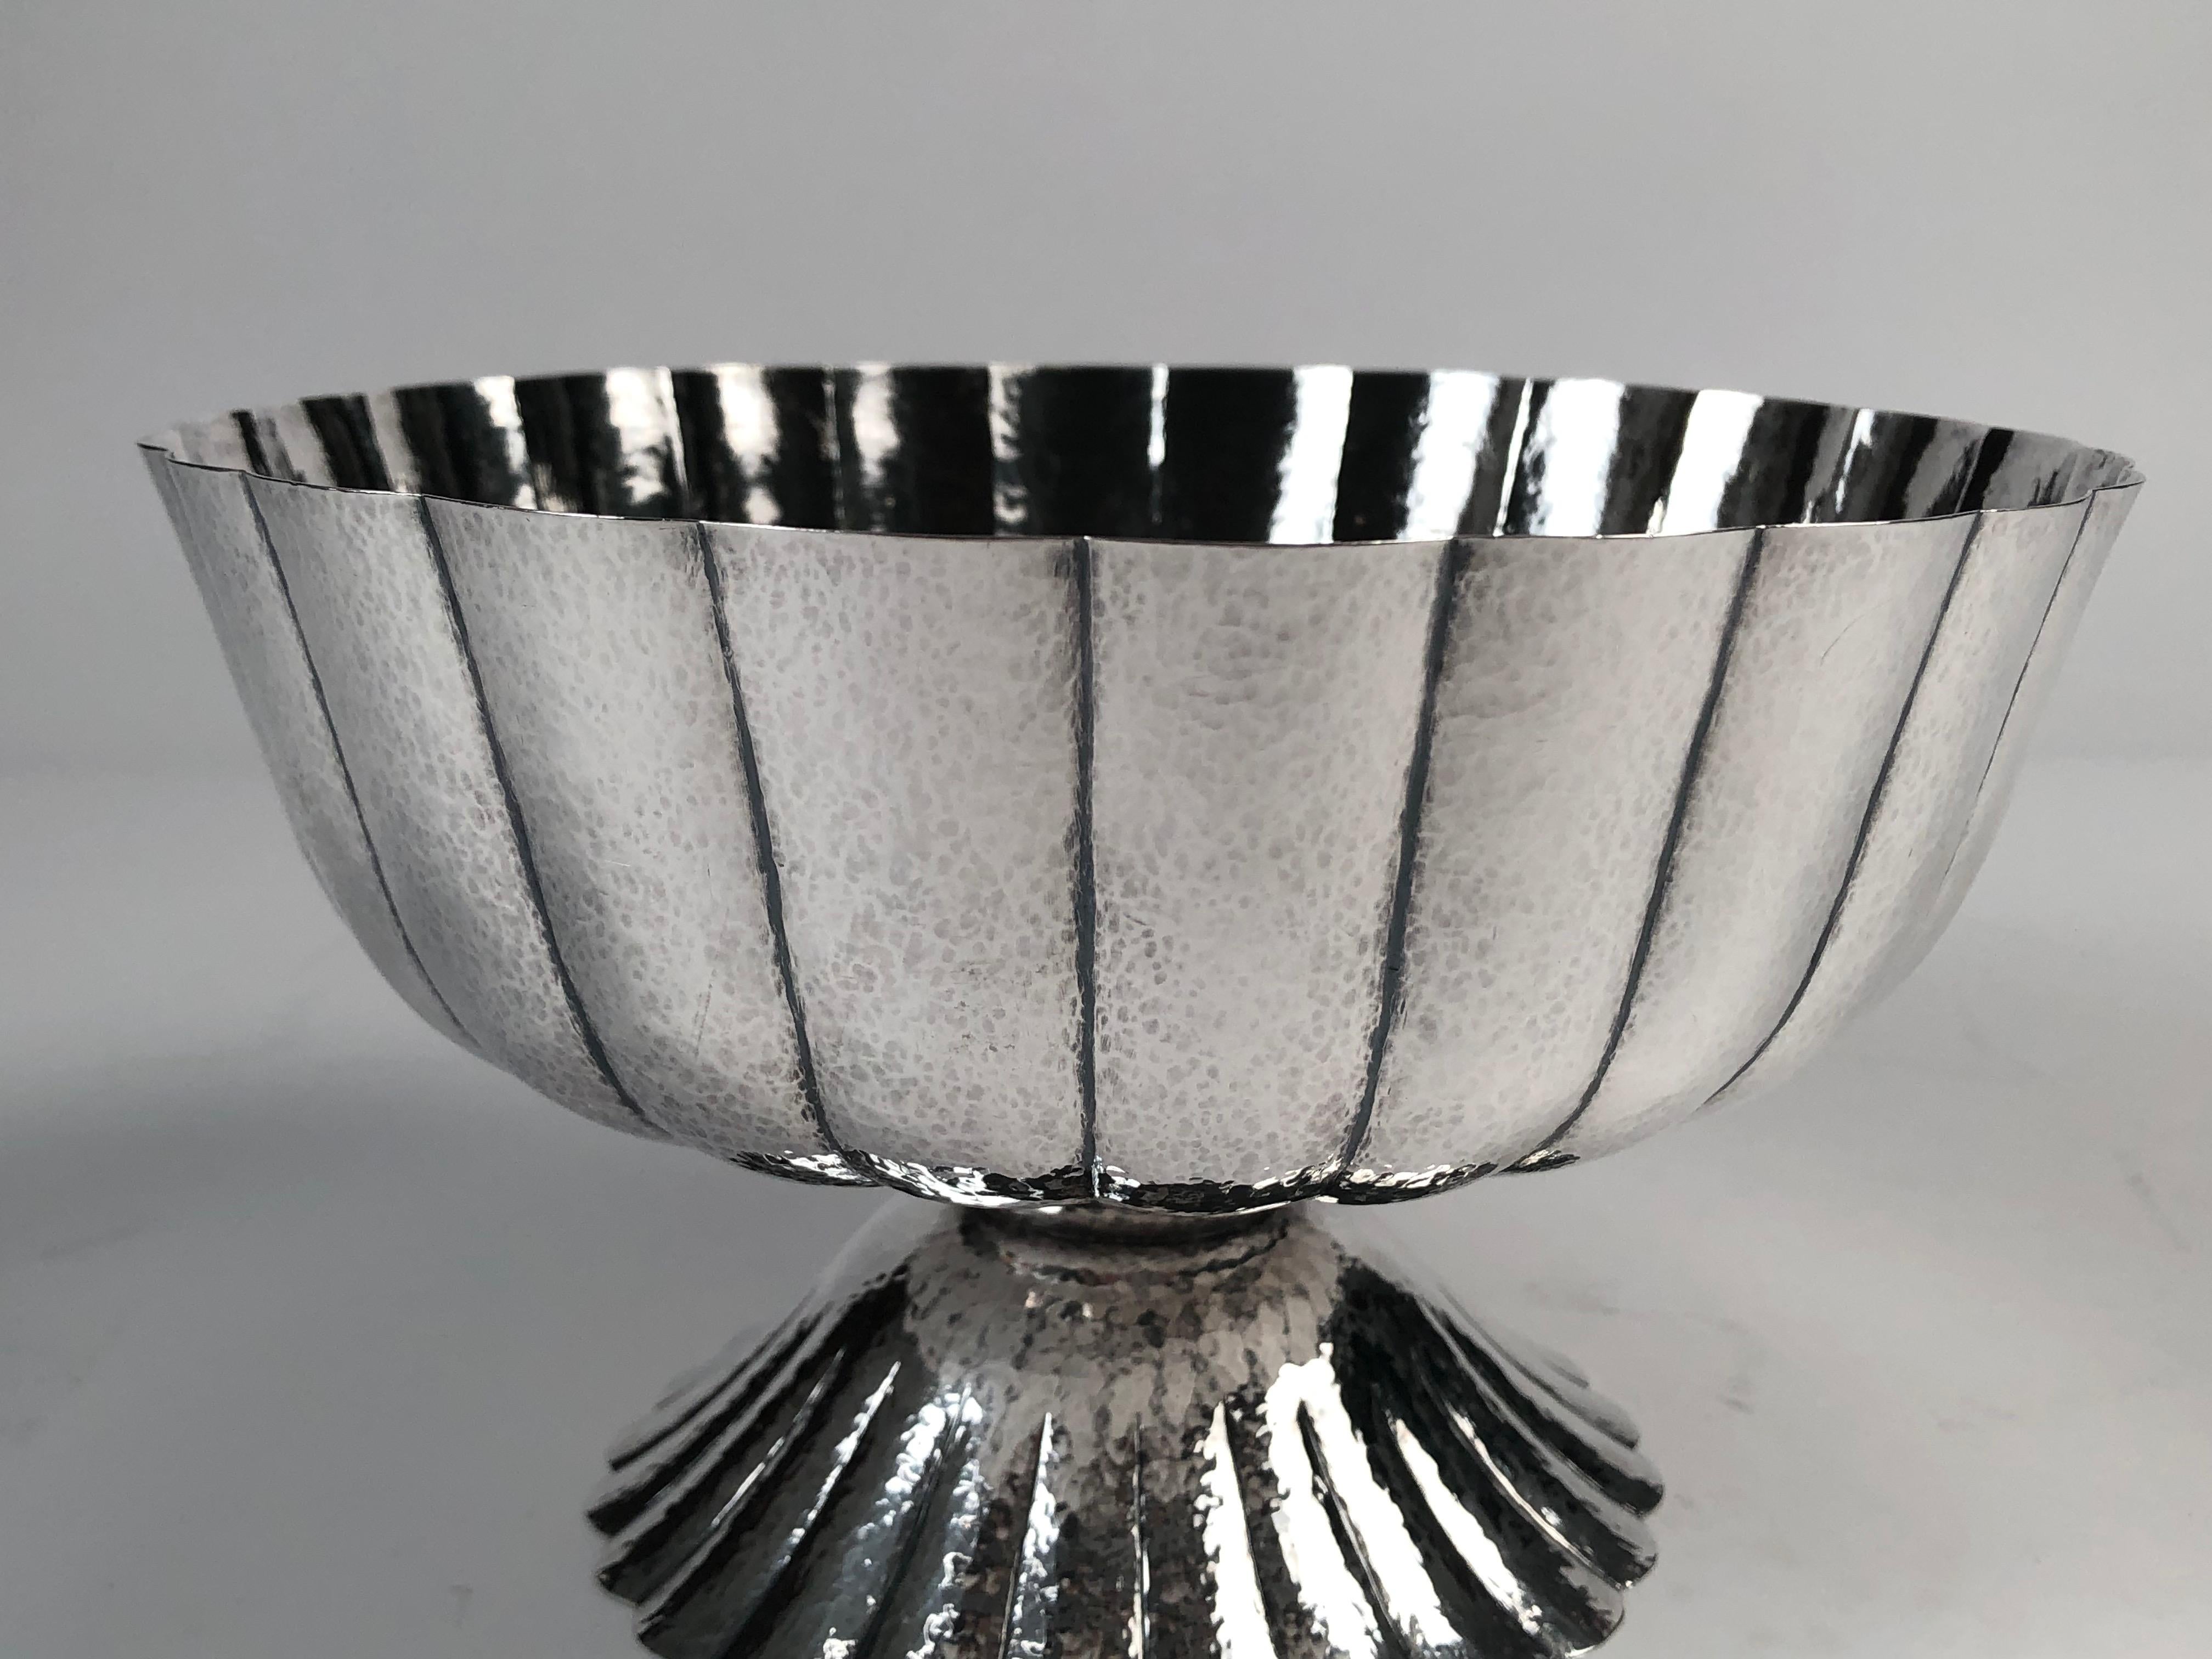 Austrian Viennese Secessionist Silver Footed Bowl after a Josef Hoffmann Design